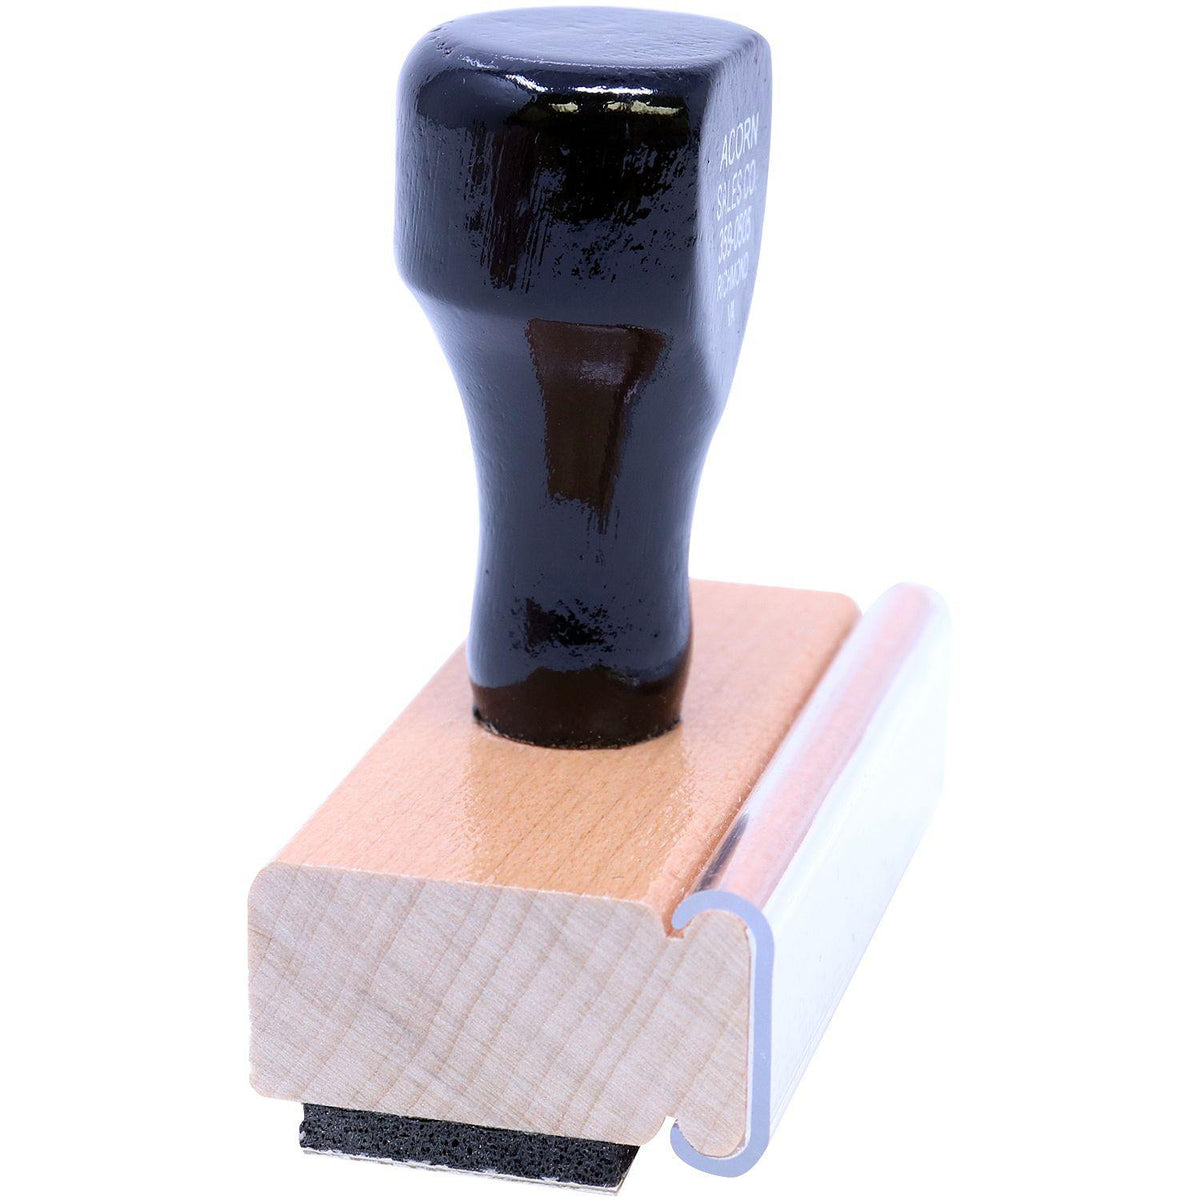 No Mail Receptacle Rubber Stamp - Engineer Seal Stamps - Brand_Acorn, Impression Size_Small, Stamp Type_Regular Stamp, Type of Use_Office, Type of Use_Postal &amp; Mailing